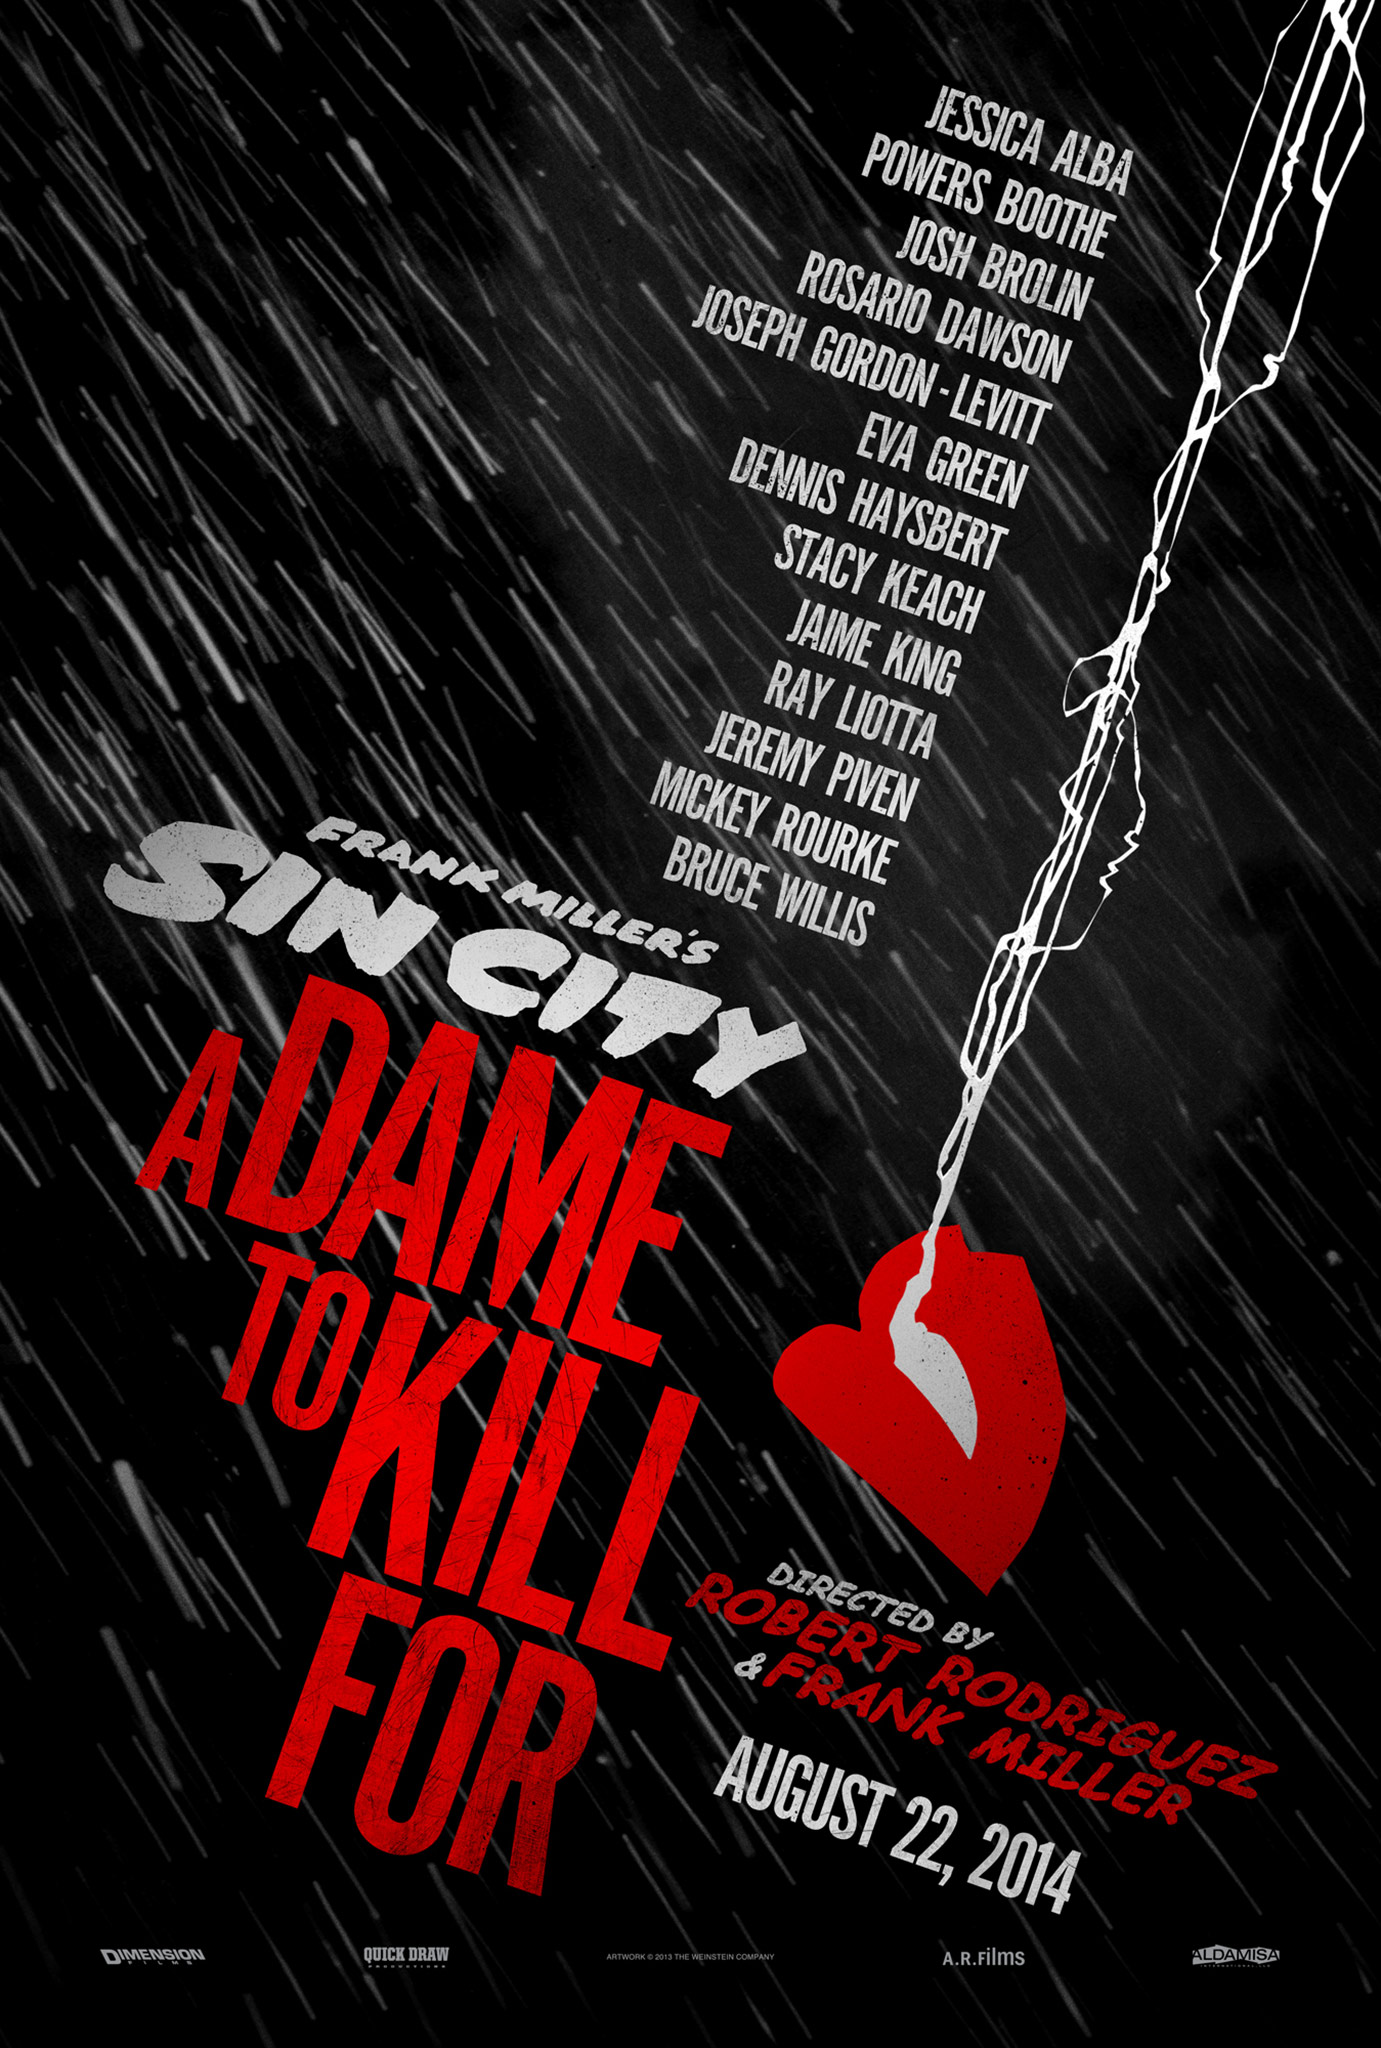 Sin City: A Dame to Kill For（原題）』ポスター | 武蔵野ワイルドバンチ ブログ